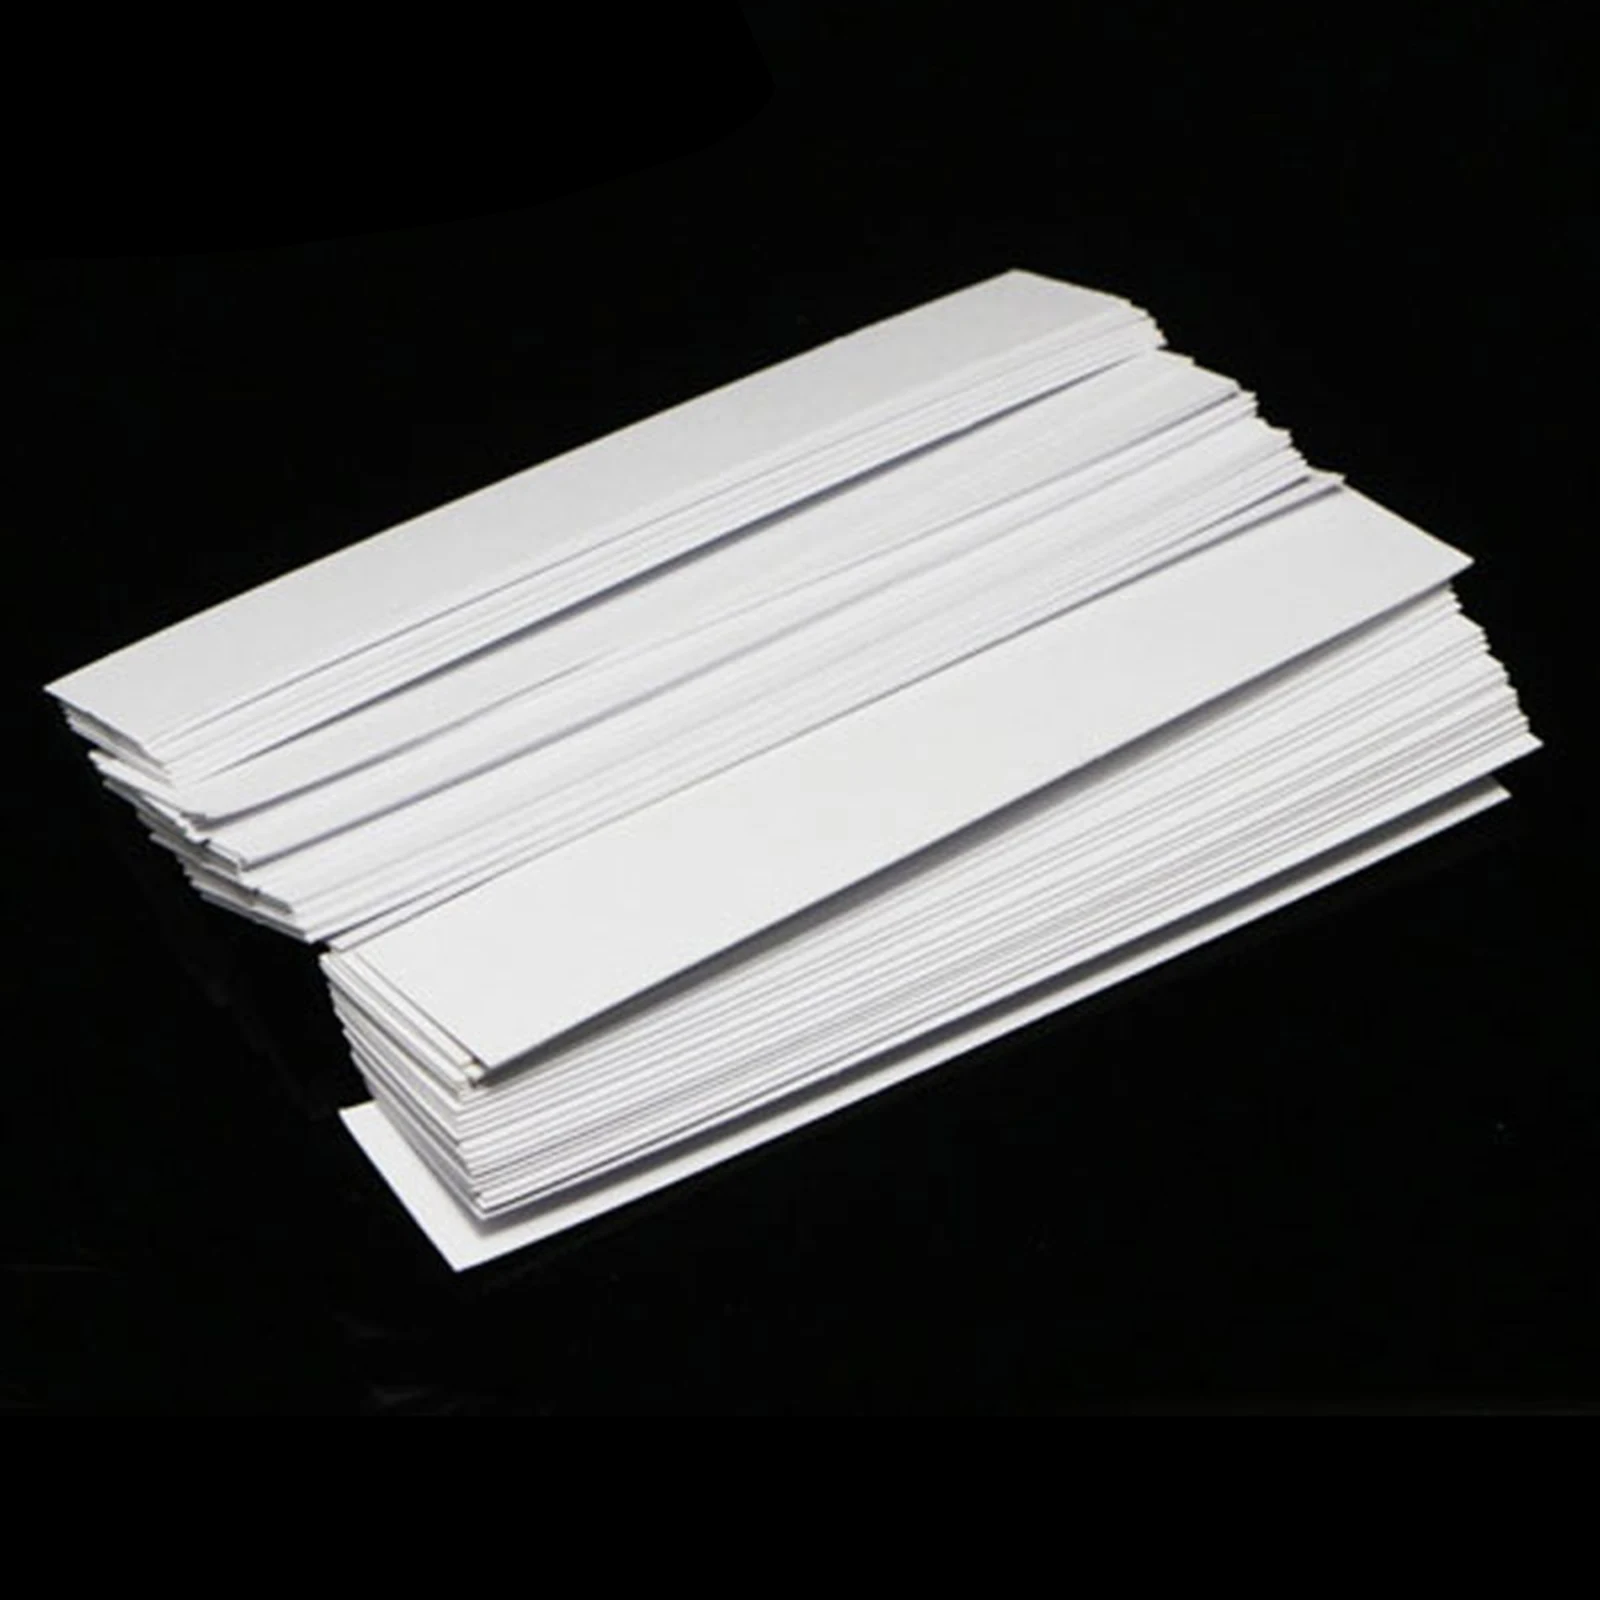 100x Perfume Paper Test Strips for Aromatherapy Essential Oil 5x0.6 Inch